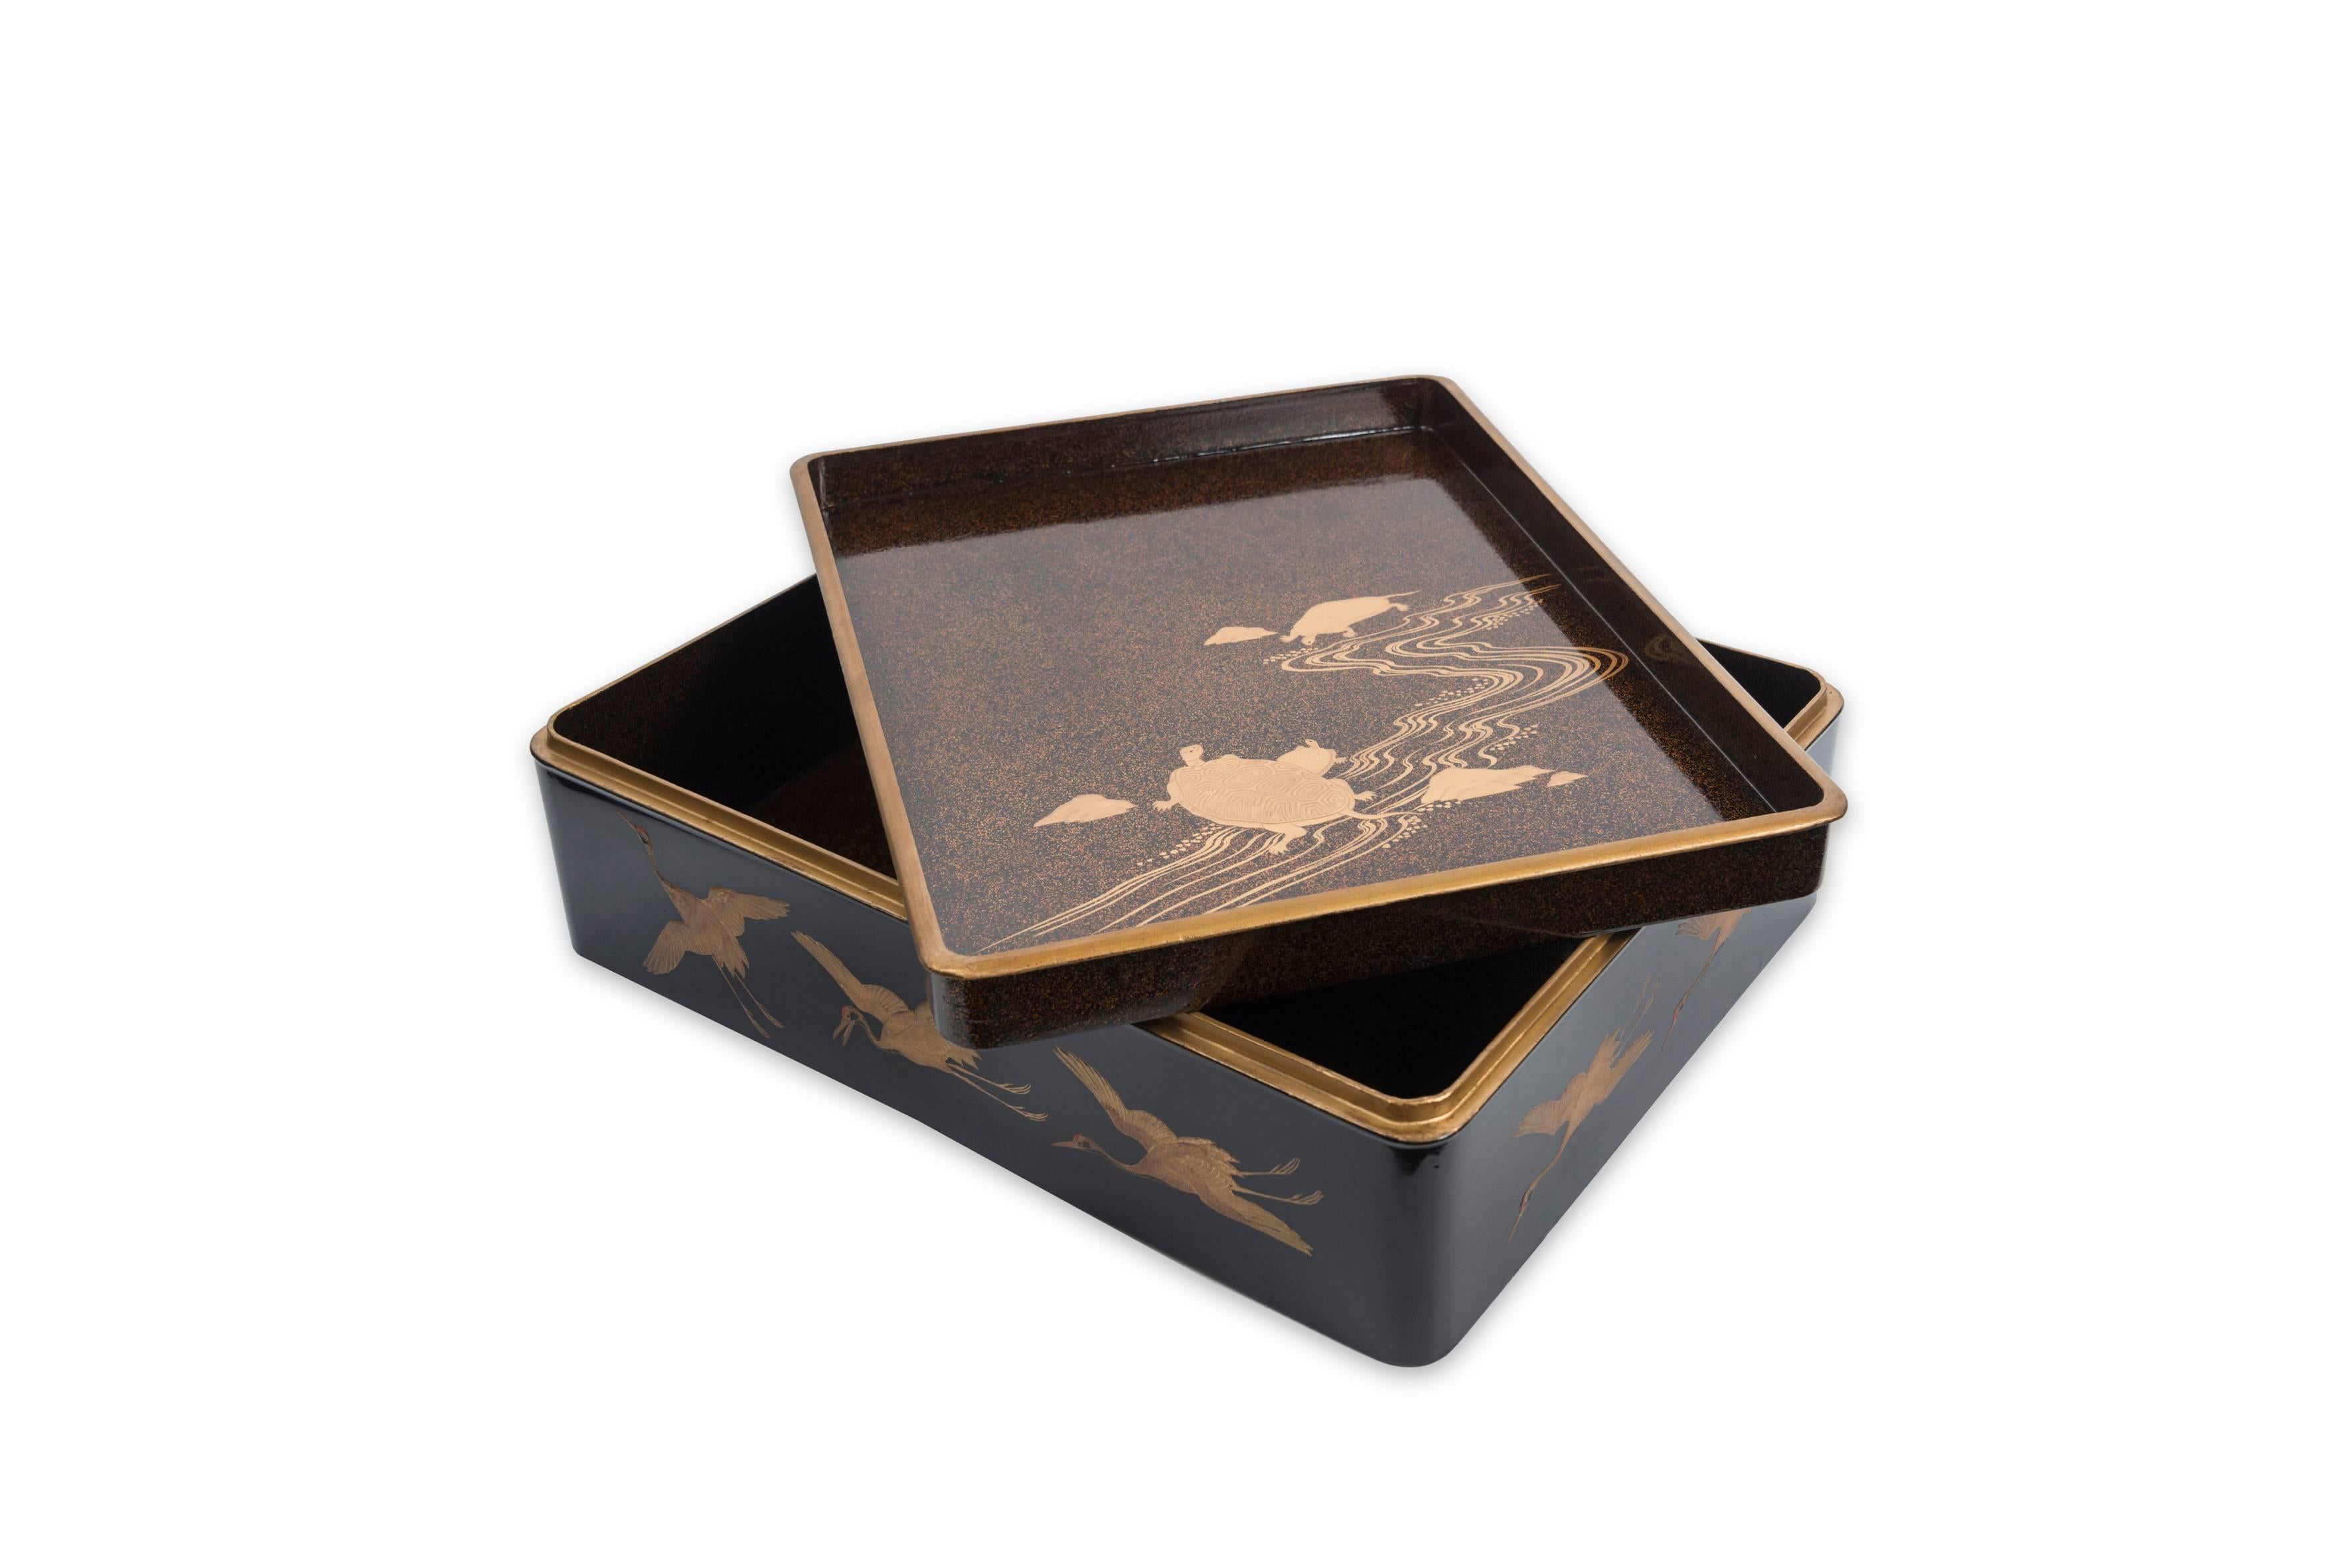 Ryoshibako pines and cranes

Rectangular paperbox decorated with decorations of birds and with pines.
The lid presents a design mixing several techniques of the work of the lacquer. Indeed we see 3 cranes represented in the middle of branches of